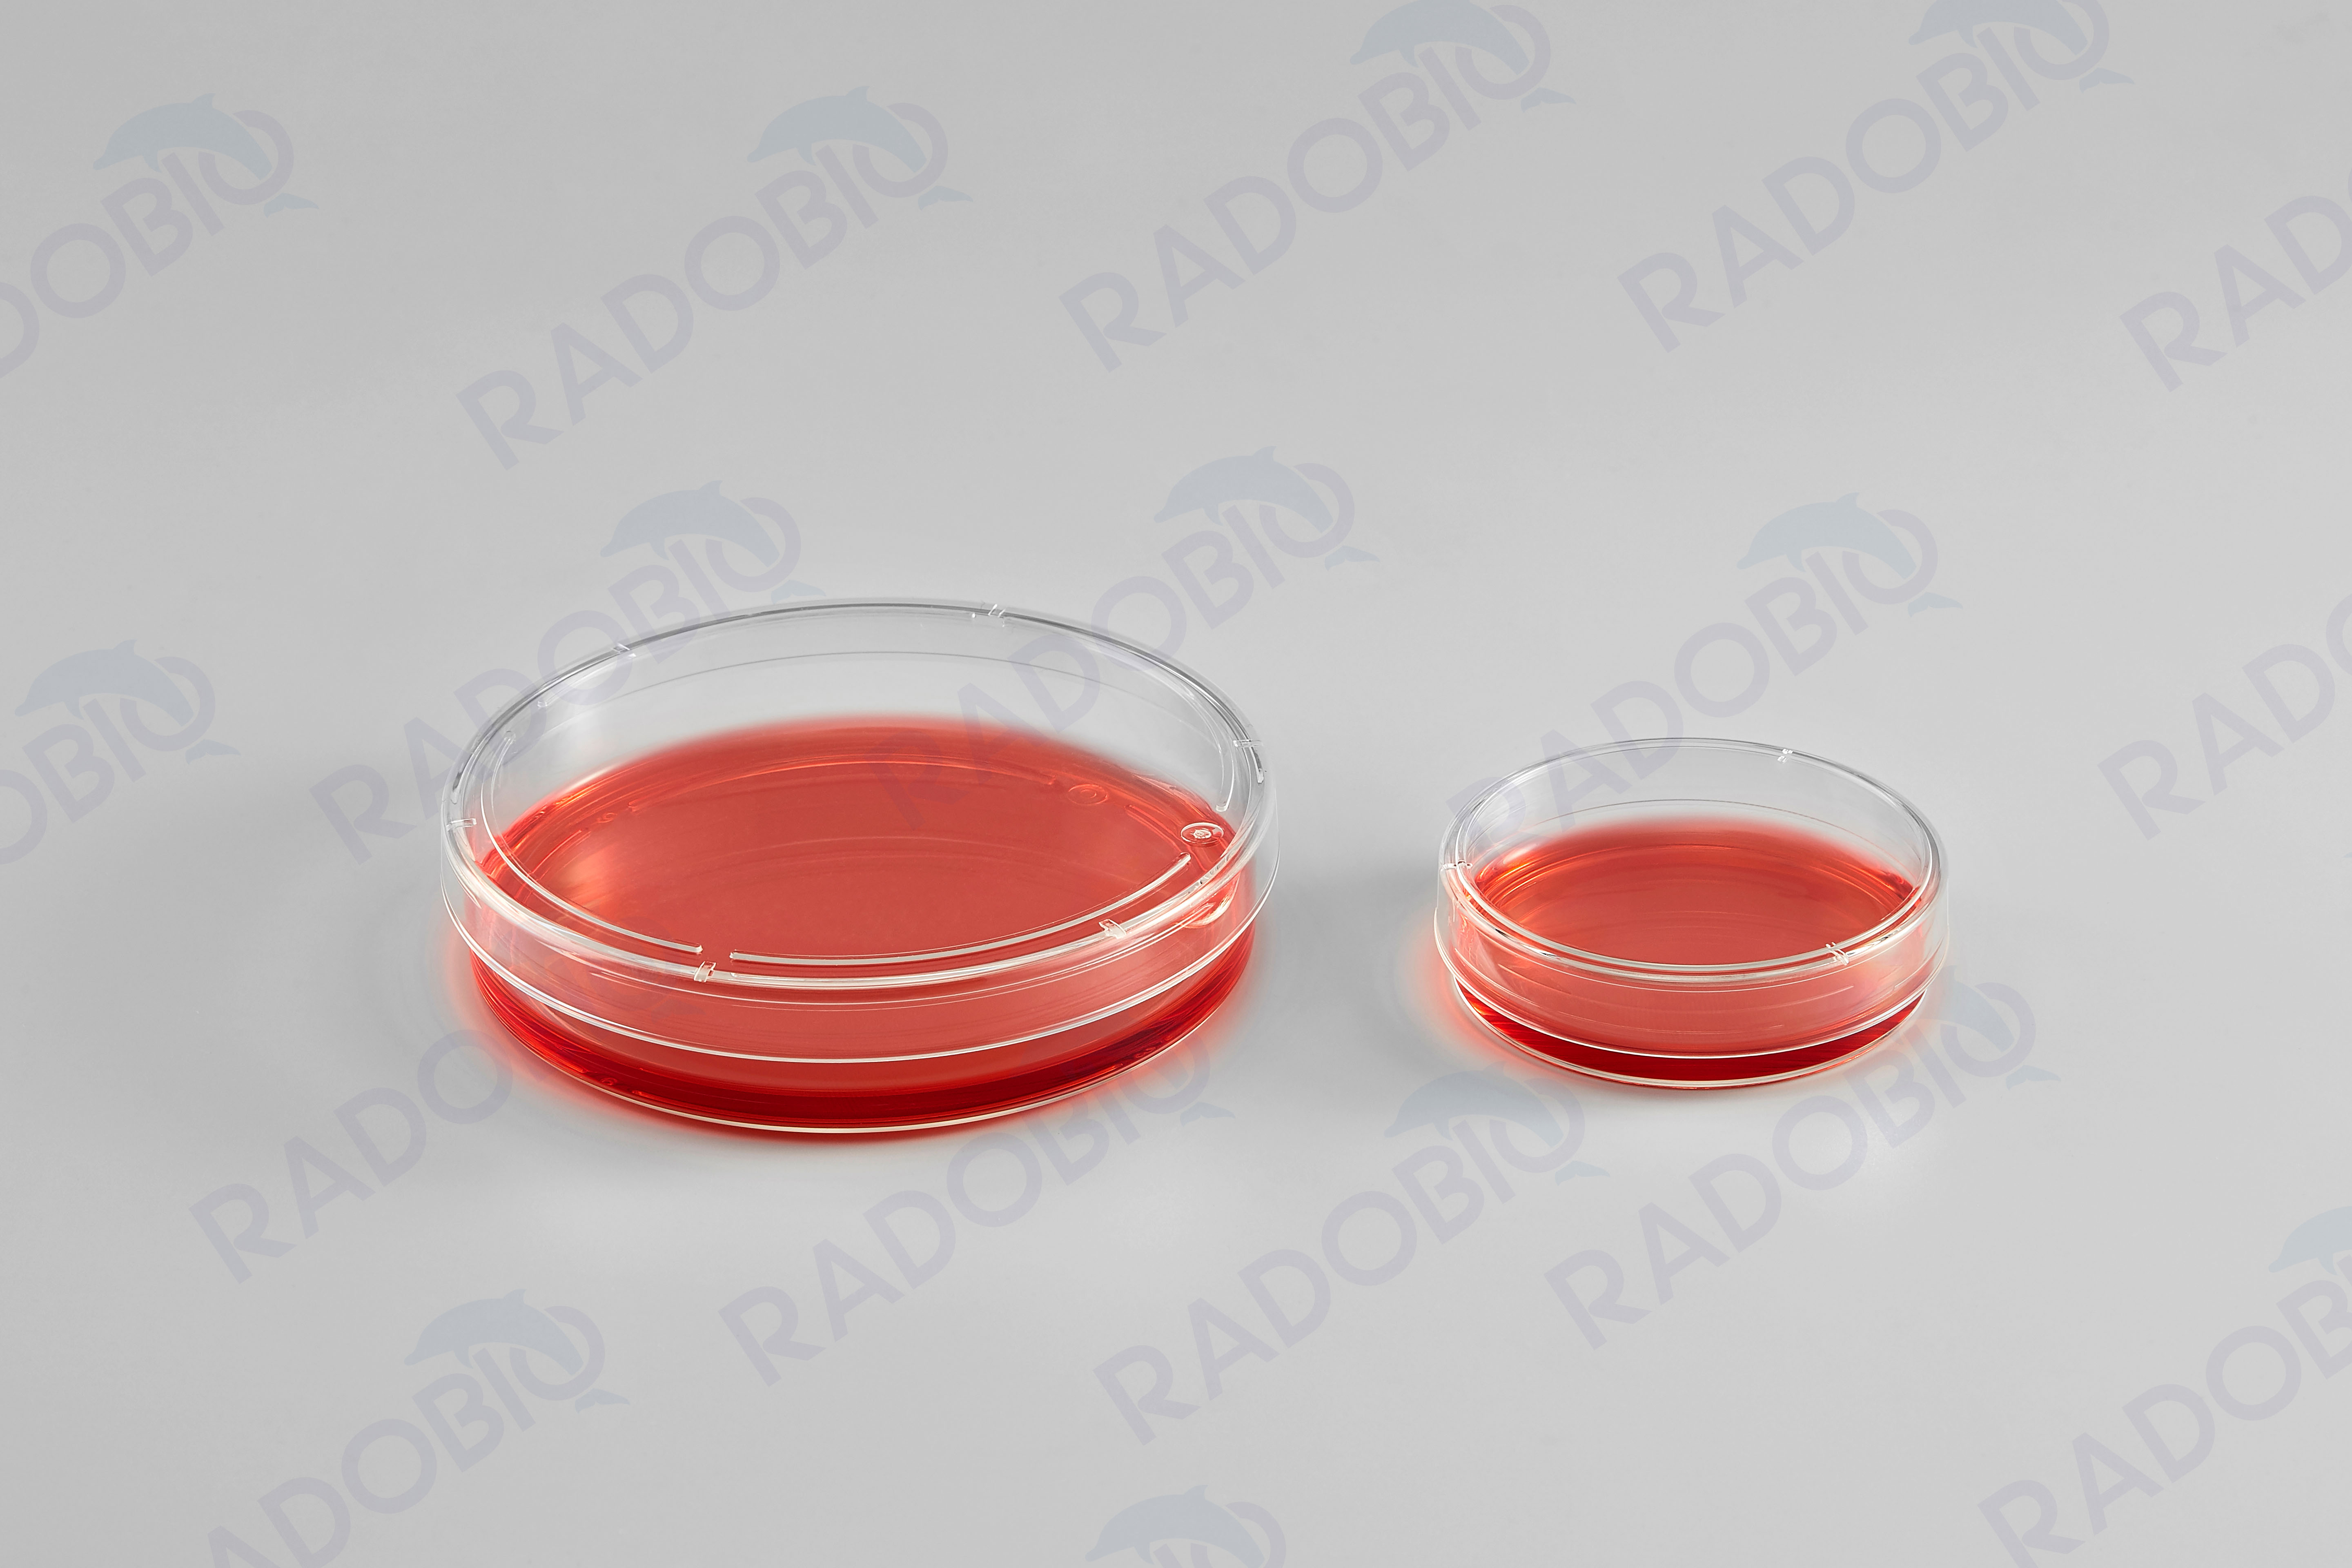 Cell Culture Dish Featured Image